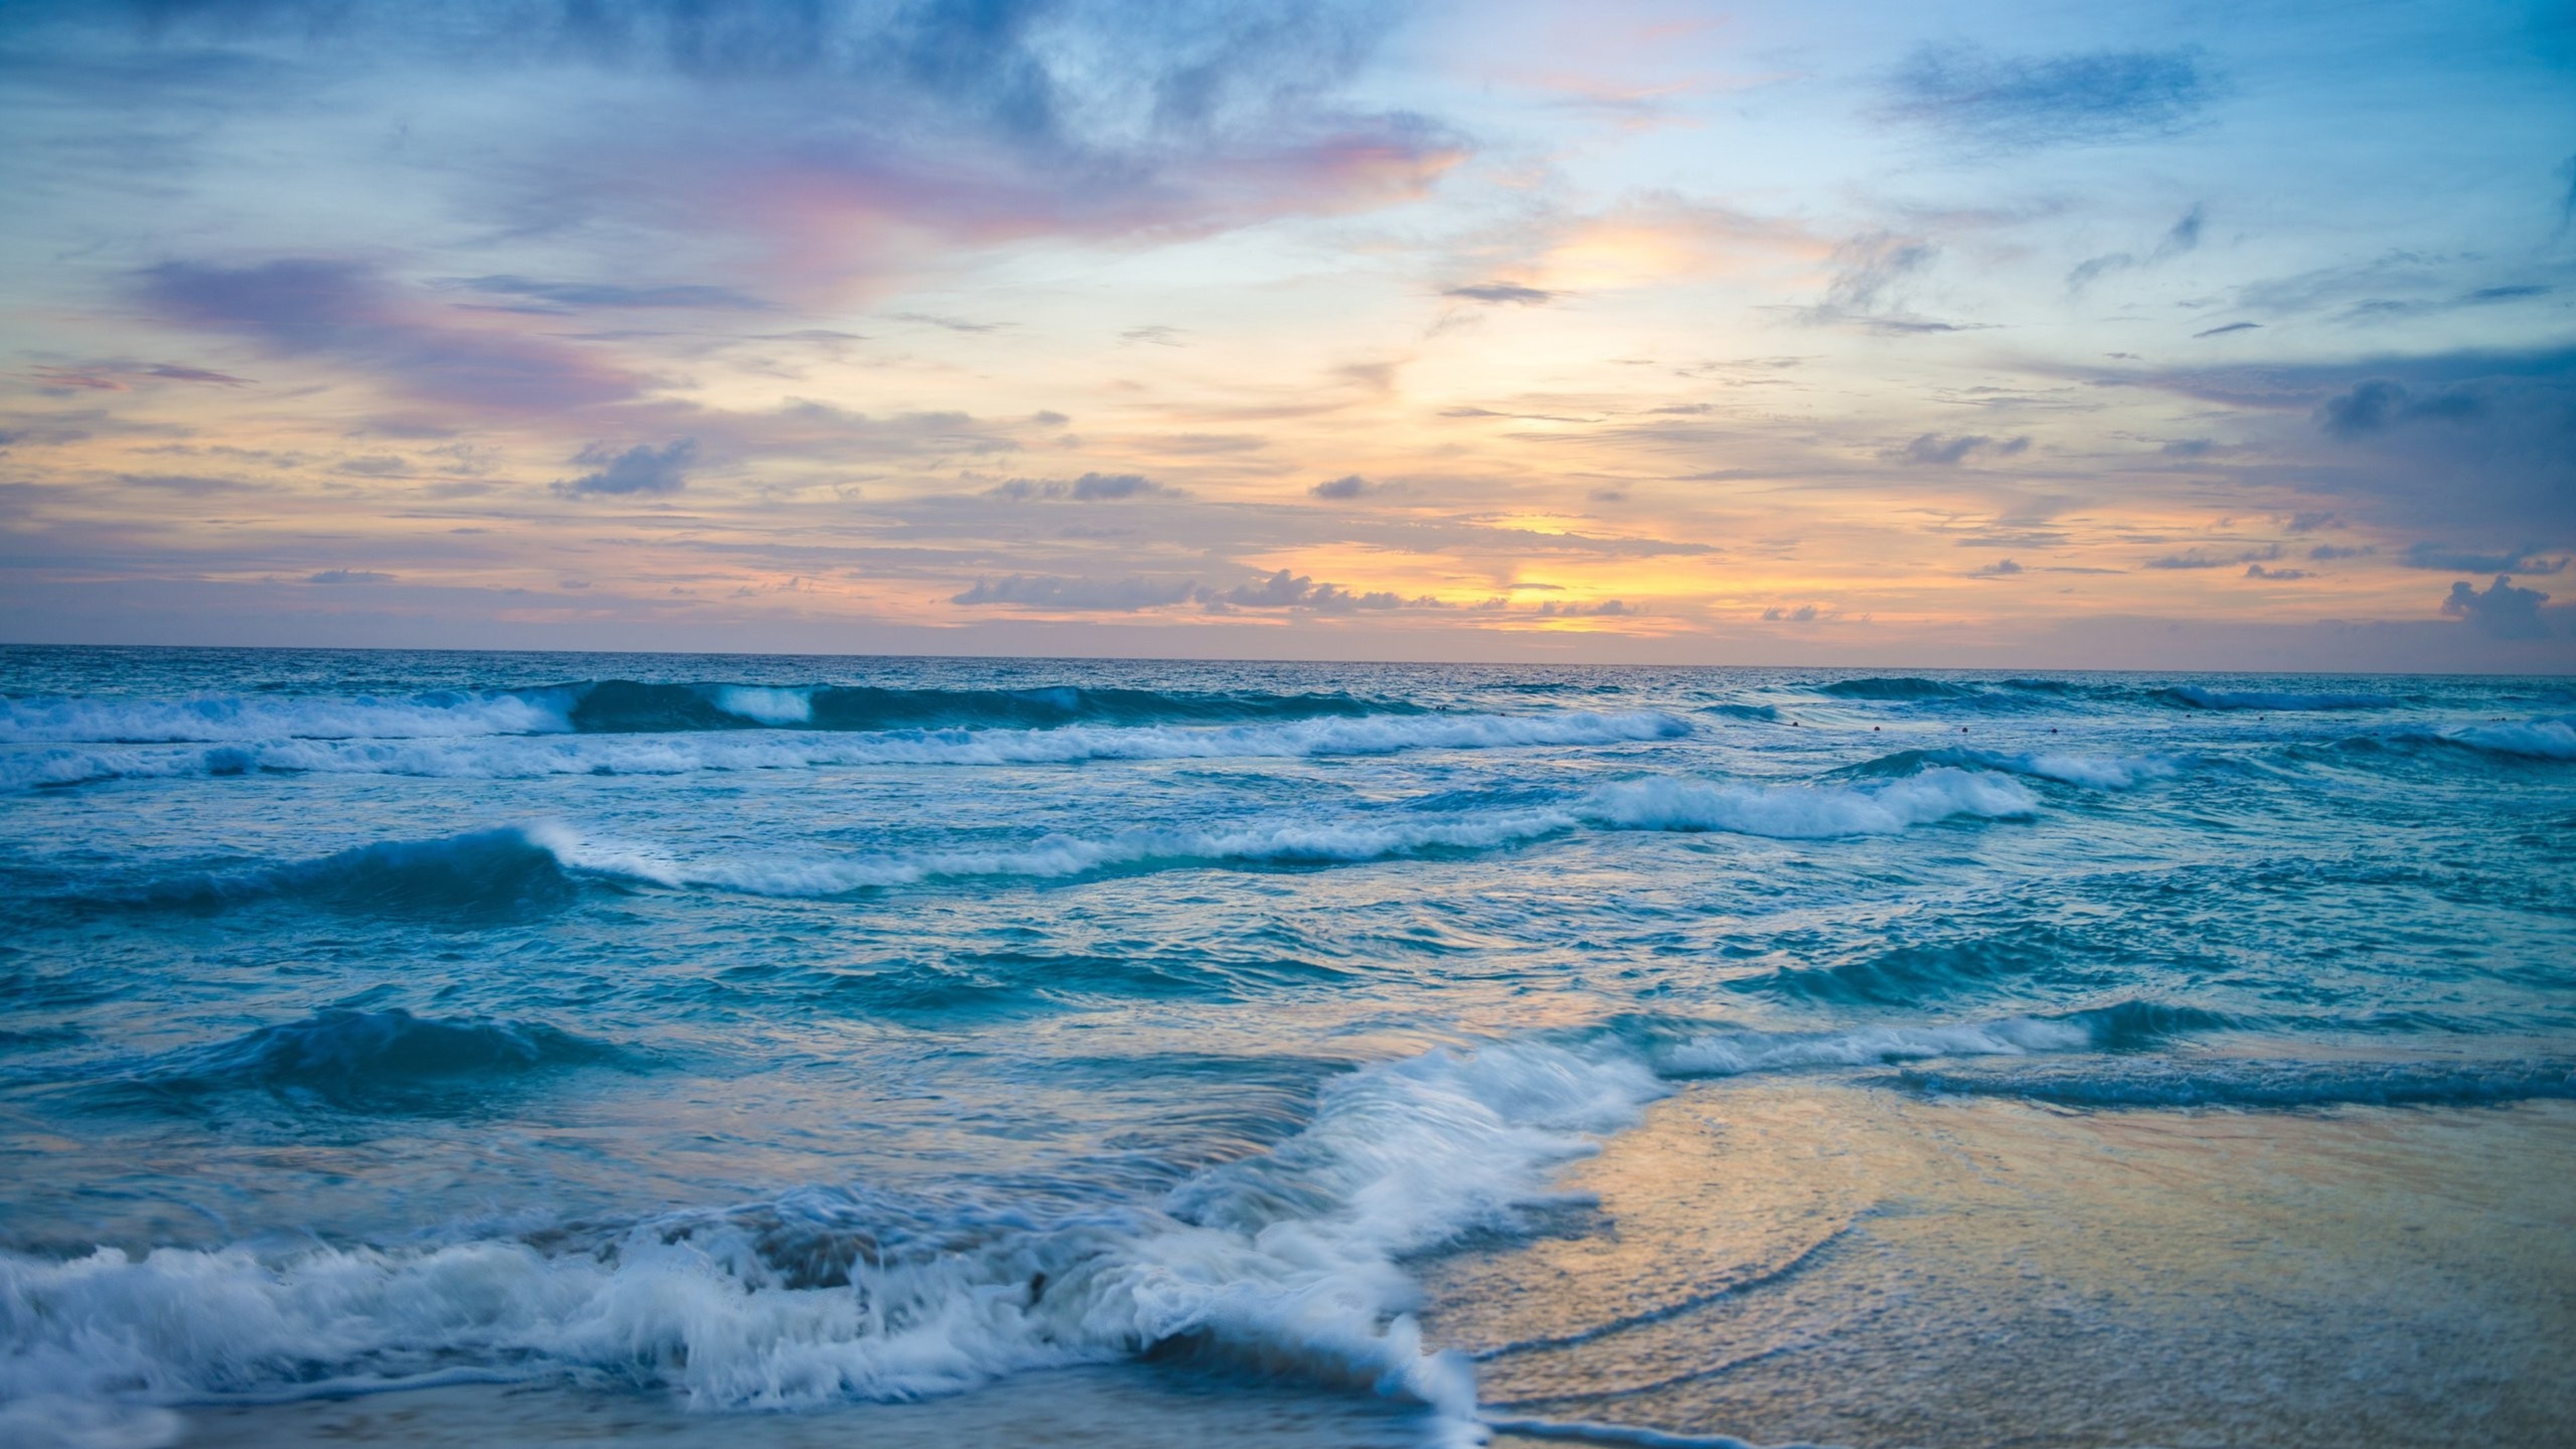 Ocean Waves At Sunset Hd Nature K Wallpapers Images Backgrounds Photos And Pictures